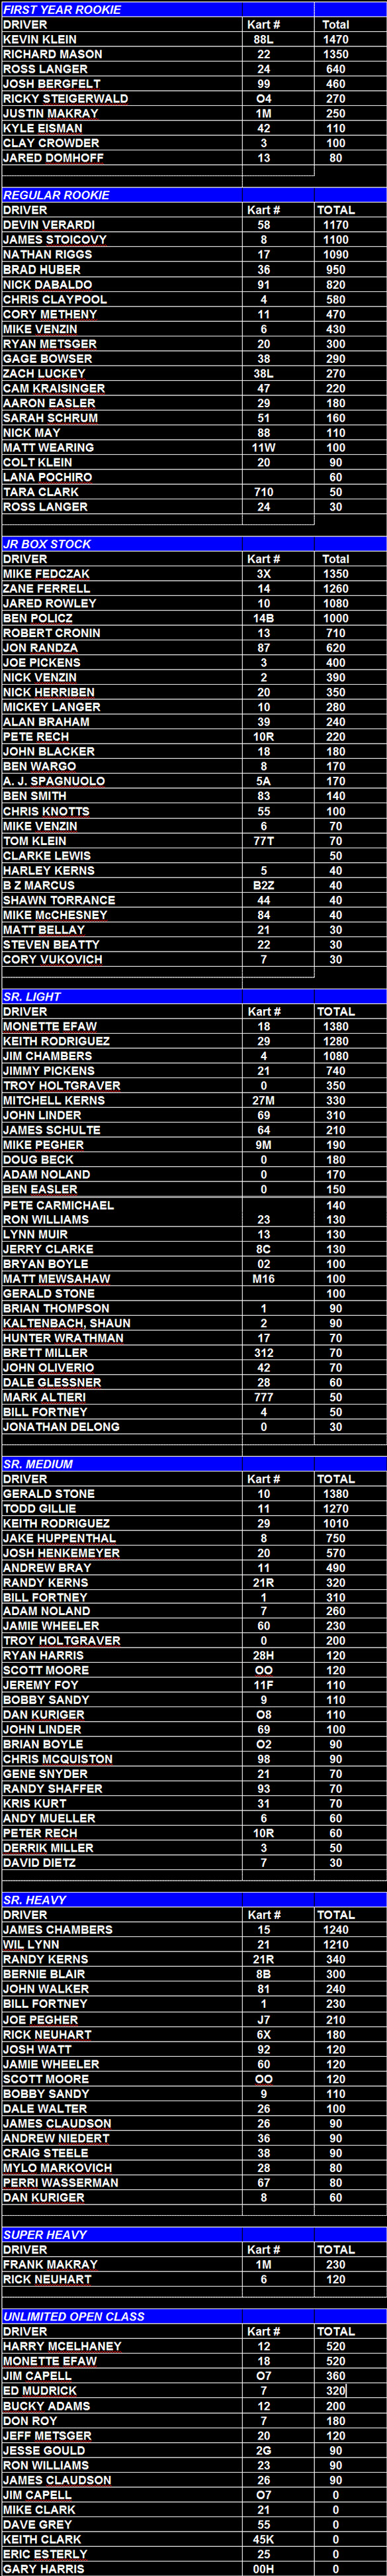 Naugle Speedway 2003 Final Point Standings